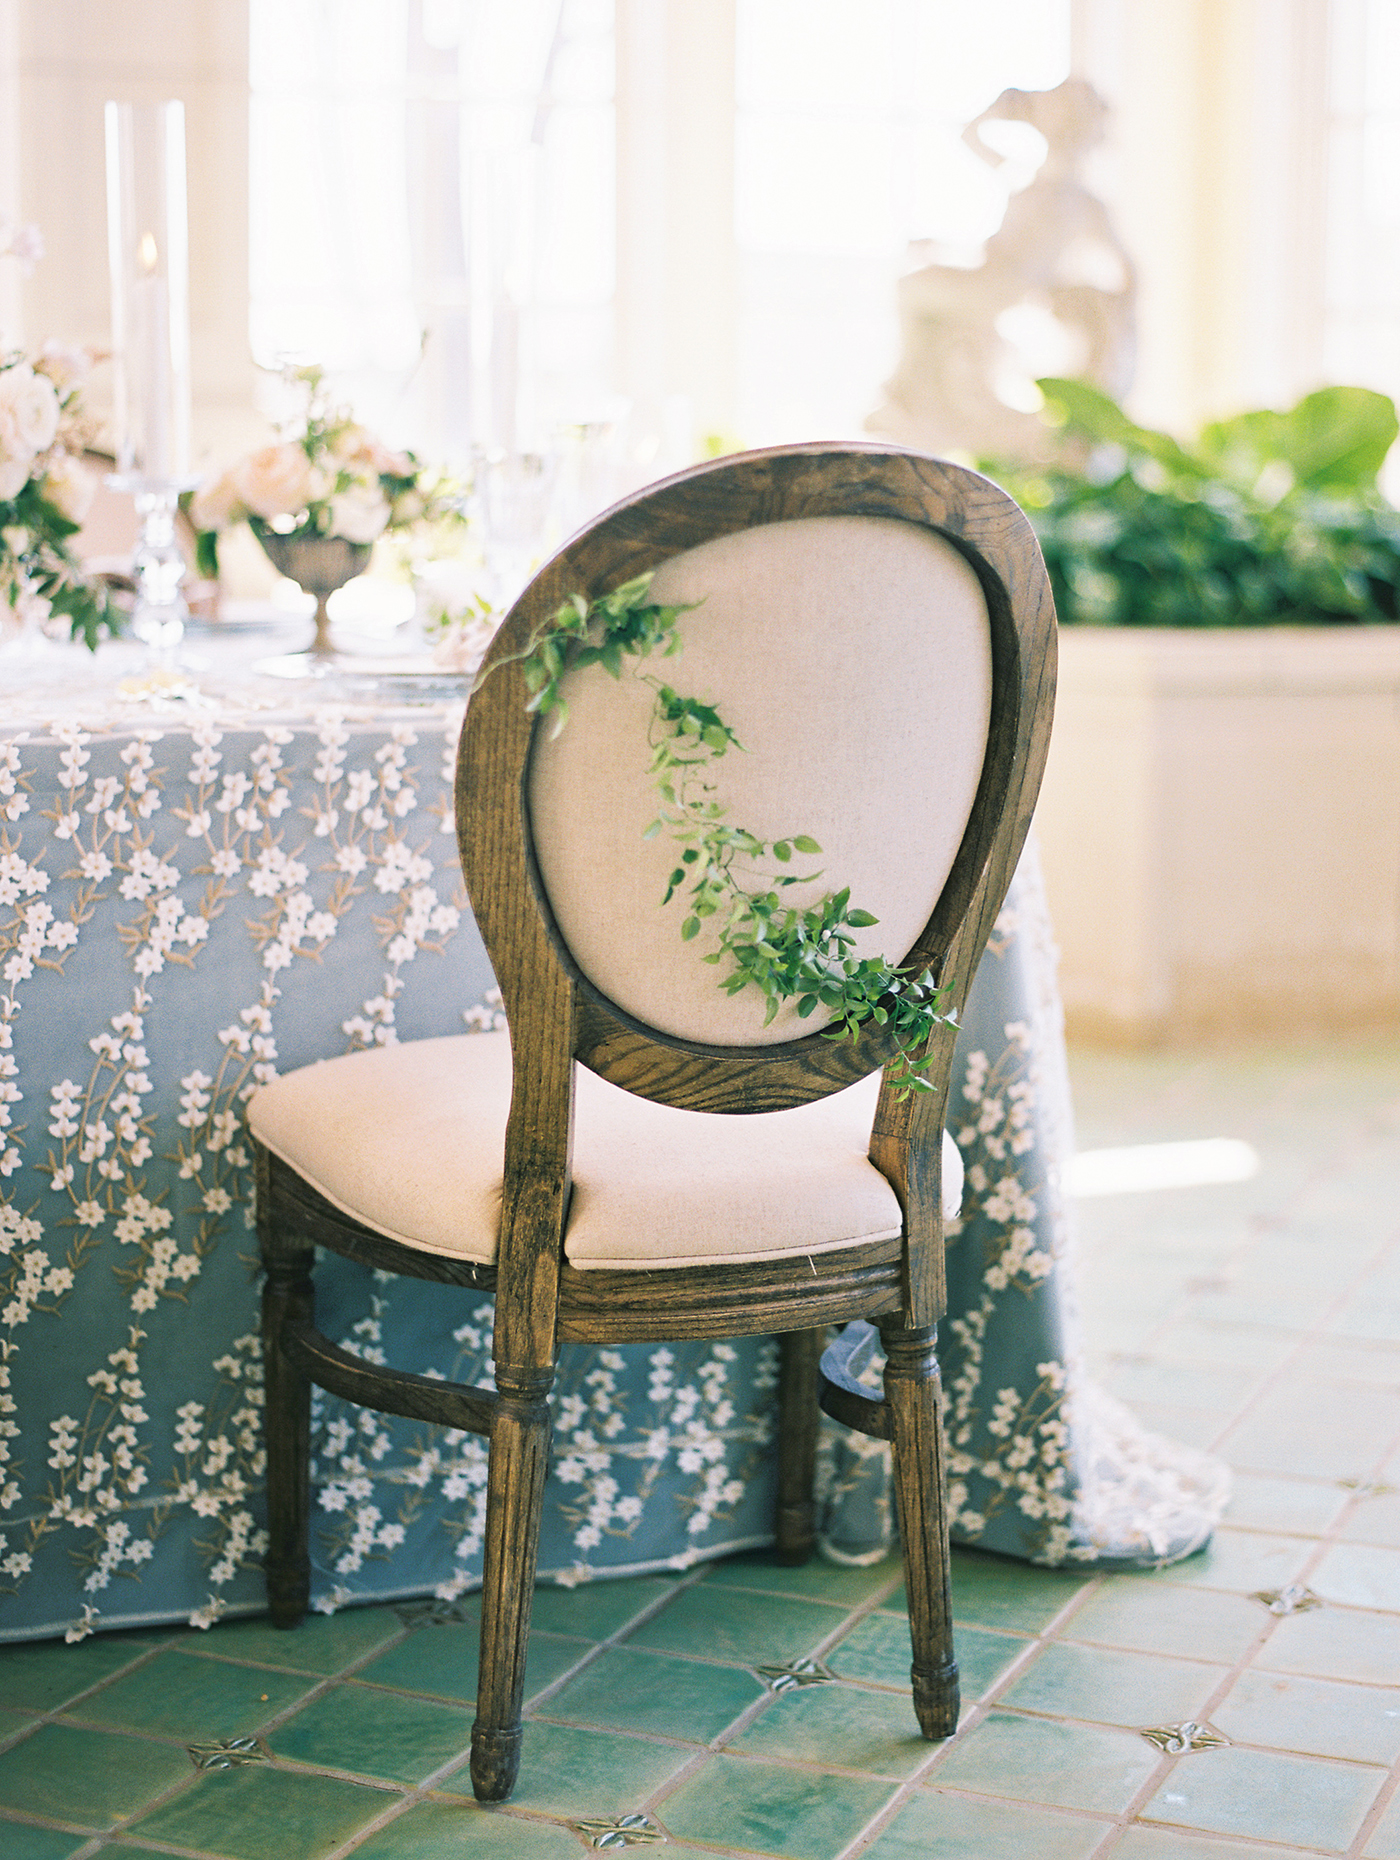 Dallas Wedding Inspiration: Abloom Editorial at The Olana in Dallas Texas | Designed by Allora & Ivy Event Co.